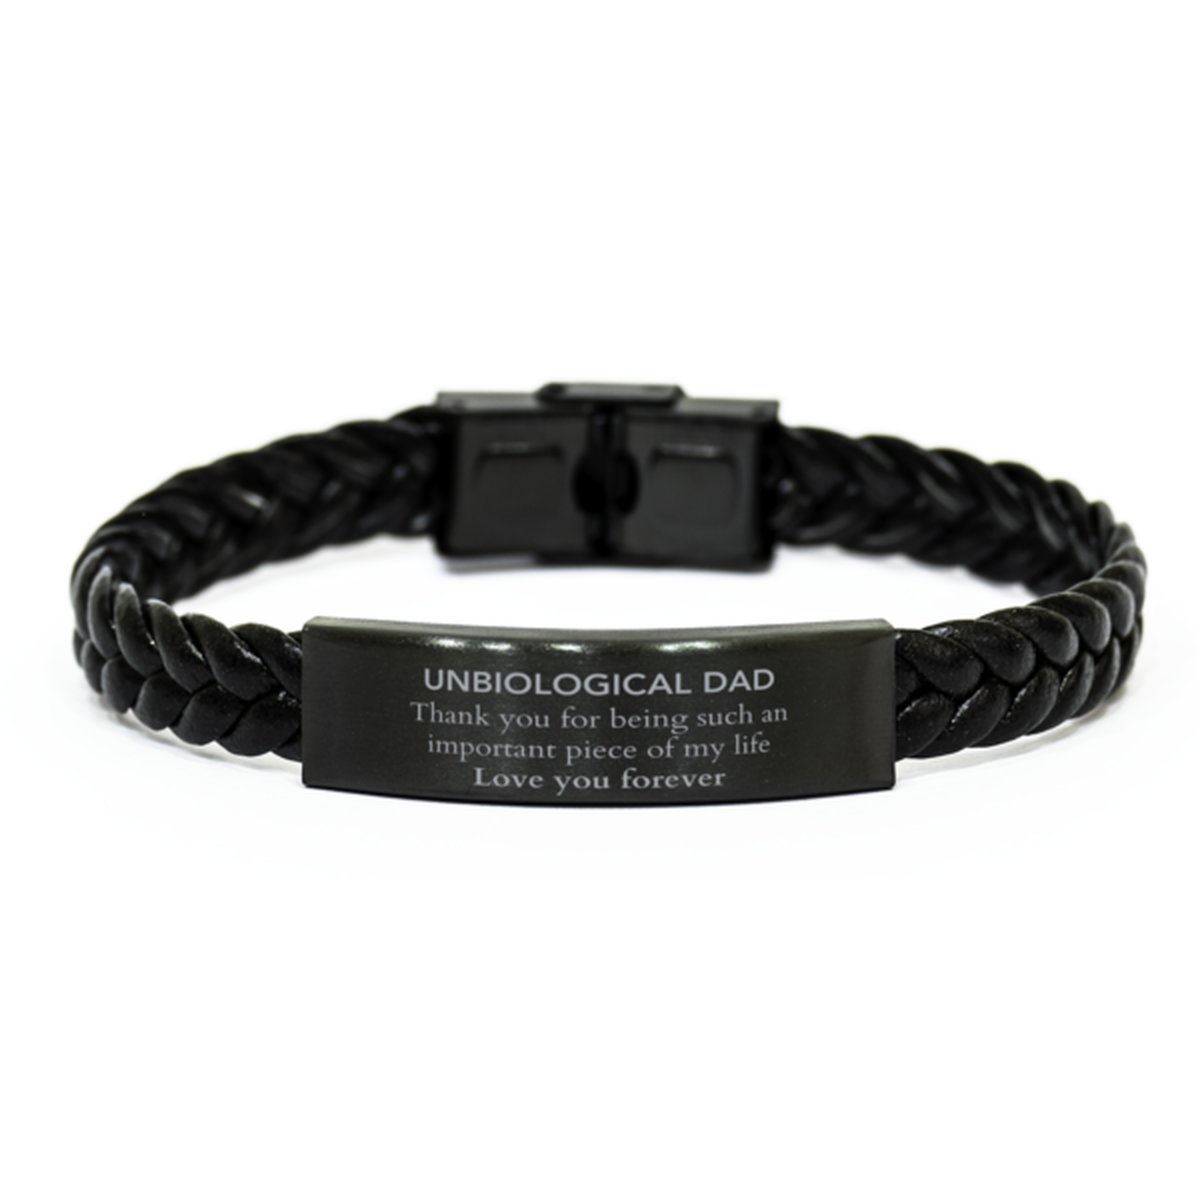 Appropriate Unbiological Dad Braided Leather Bracelet Epic Birthday Gifts for Unbiological Dad Thank you for being such an important piece of my life Unbiological Dad Christmas Mothers Fathers Day